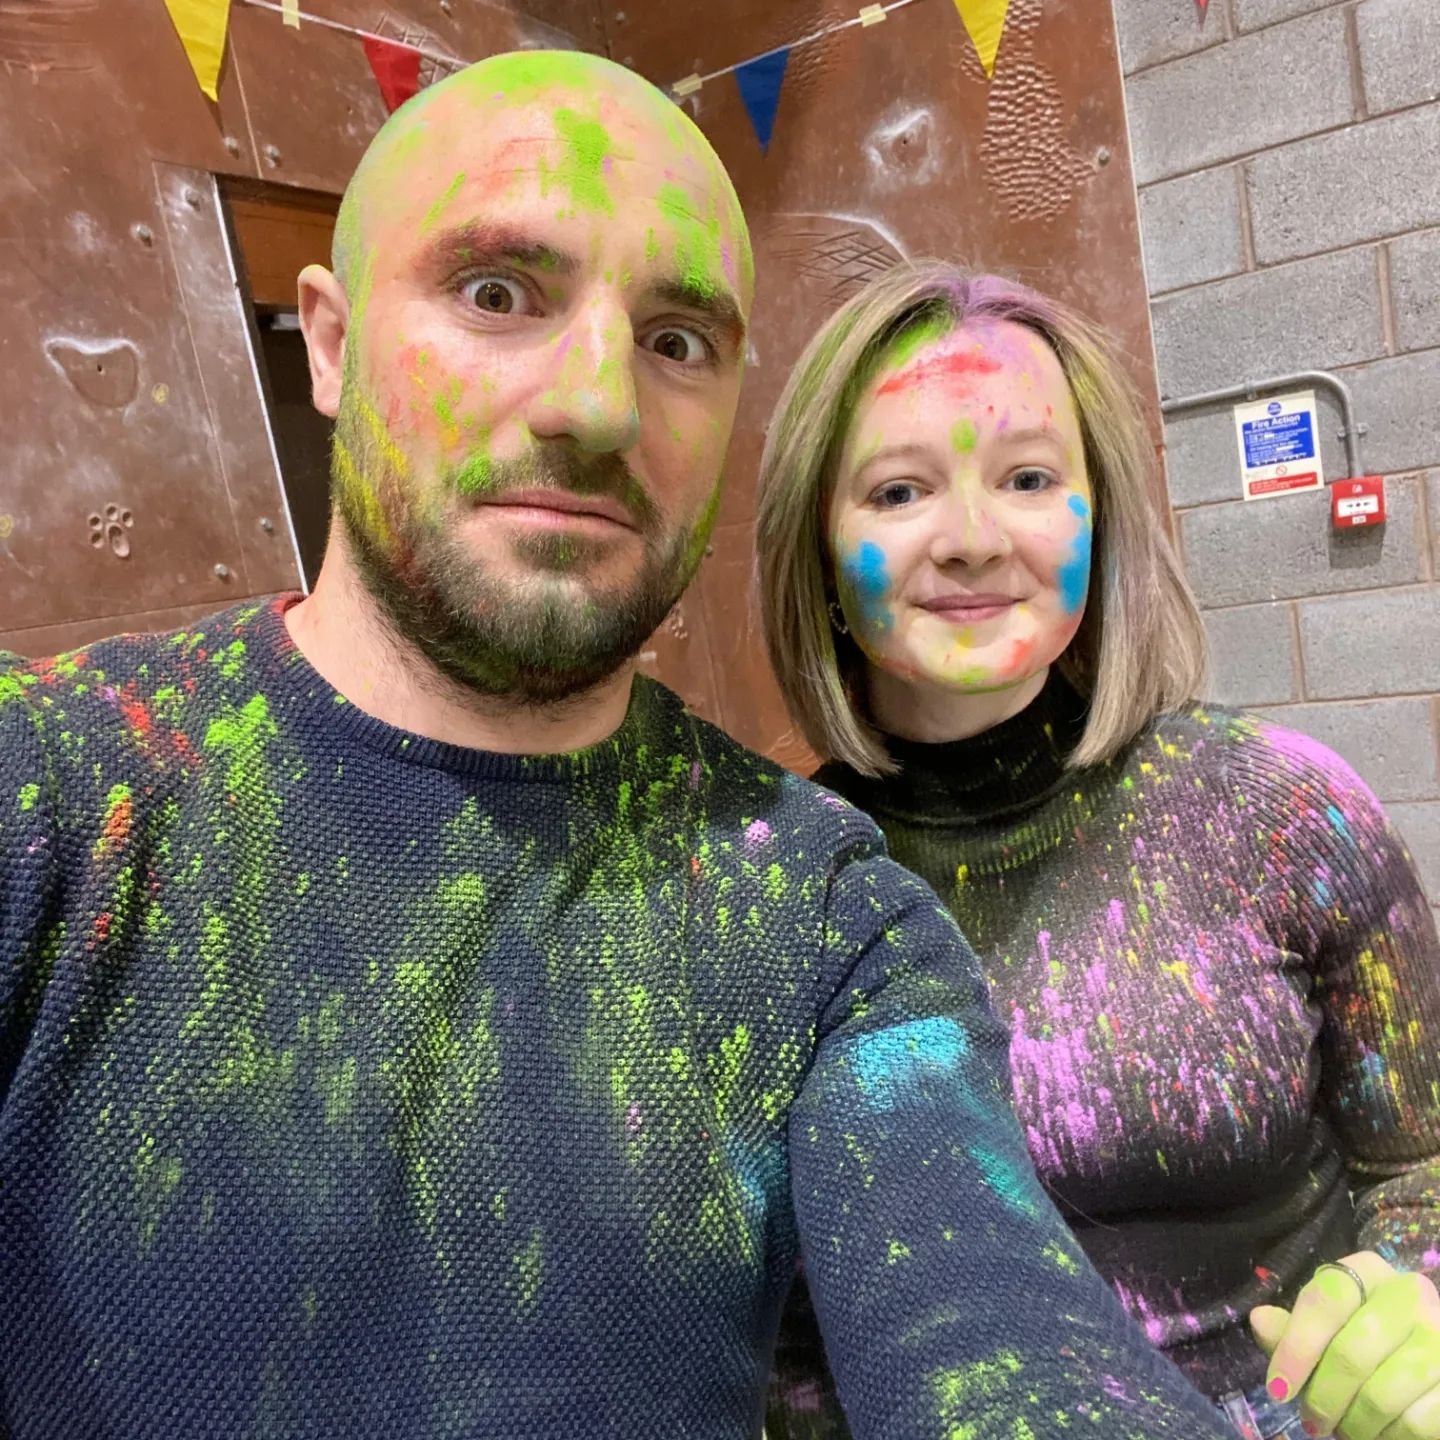 Something different for us today! So much fun! Thanks to @lalitas_indianstreetfood for organising!
Holi festival!! 
Safe to say, we got the full colour experience and loved it! 💙💚❤💛🩷
@wrekincollege 
@telfordwrekincouncil
@shropshirestar
@waller_m